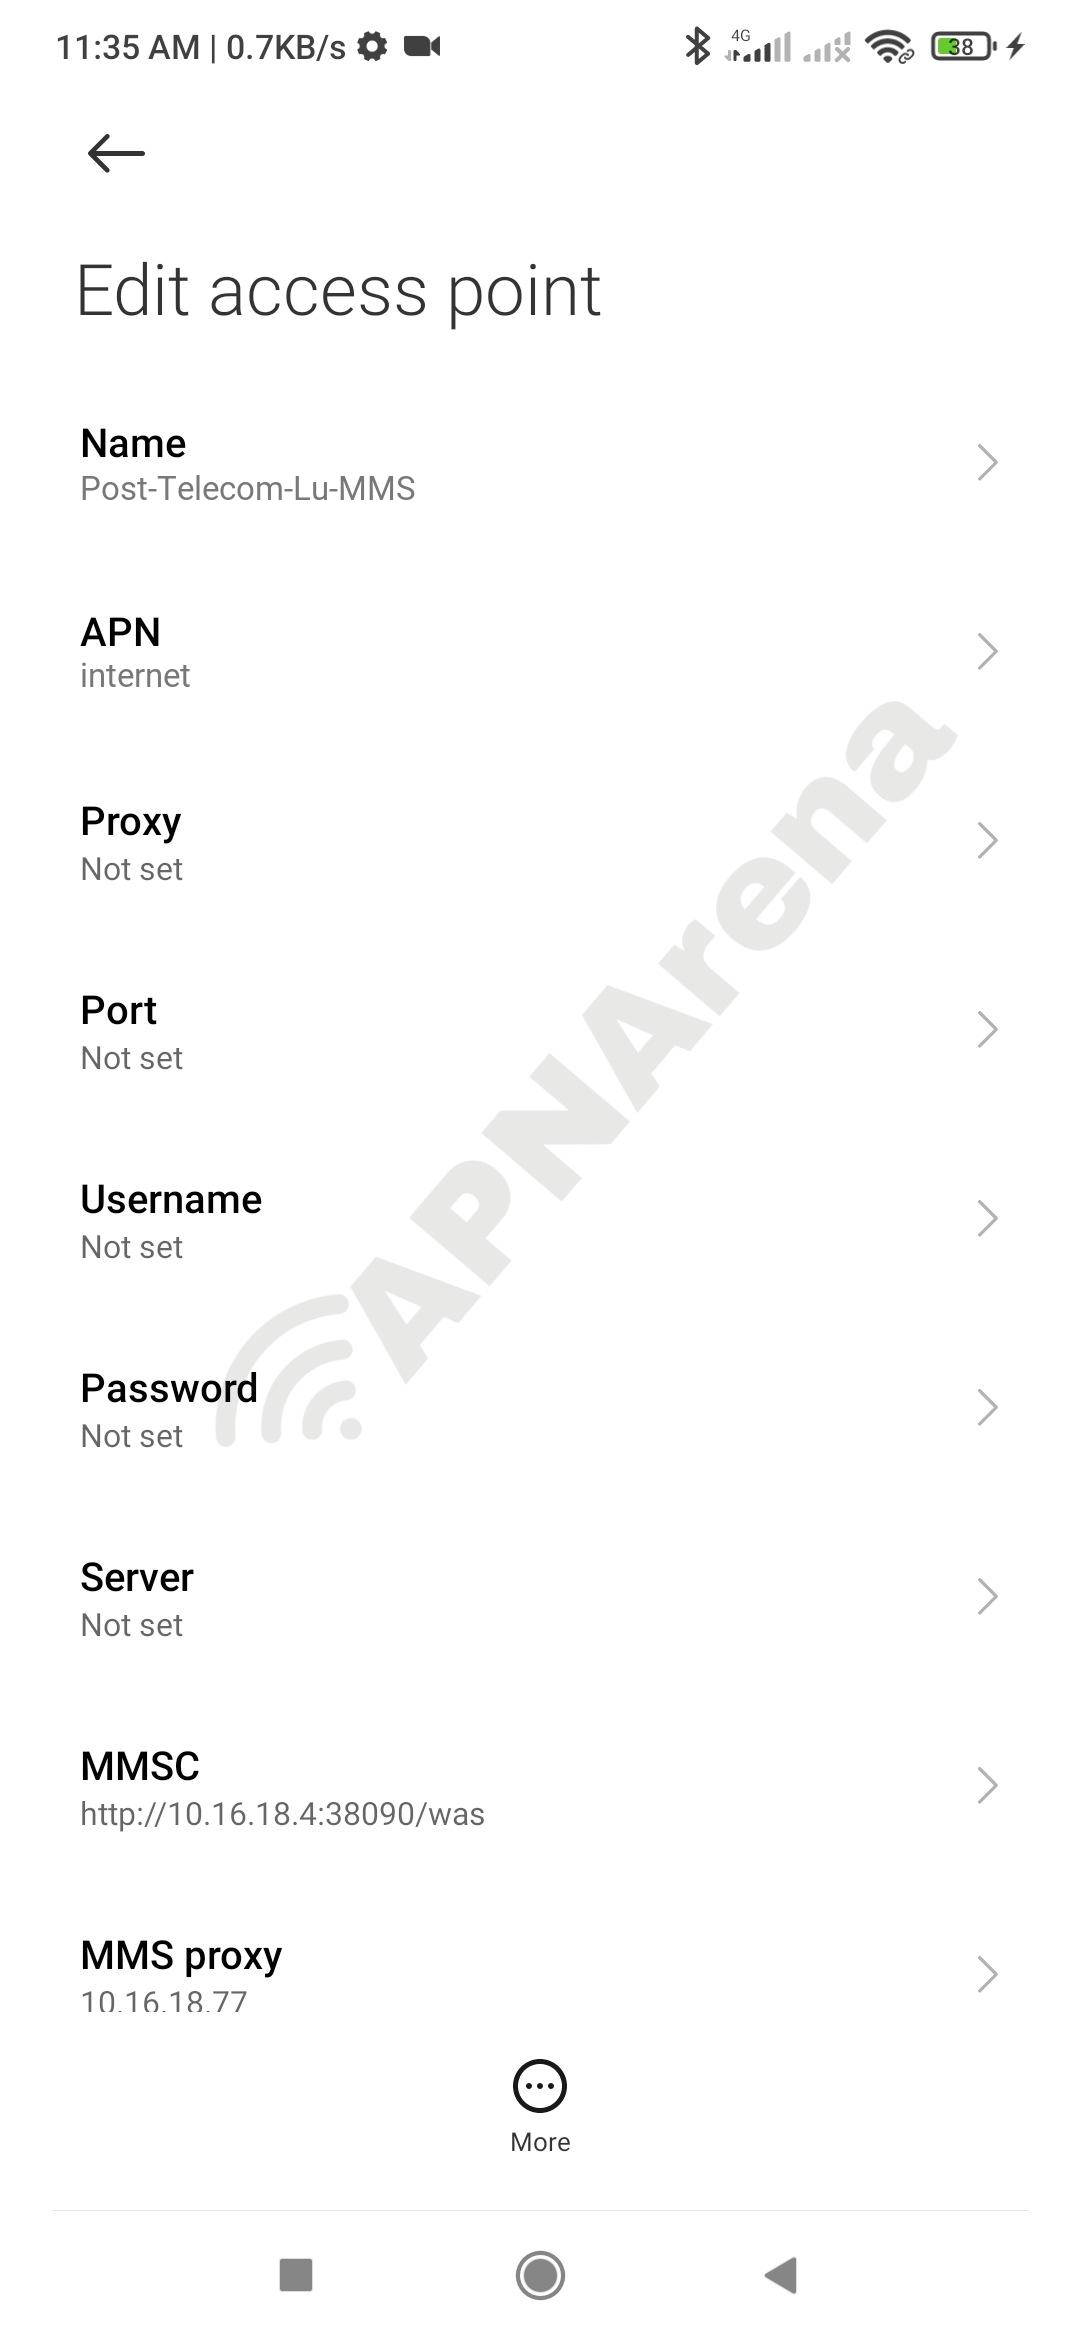 Post Telecom Luxembourg MMS Settings for Android